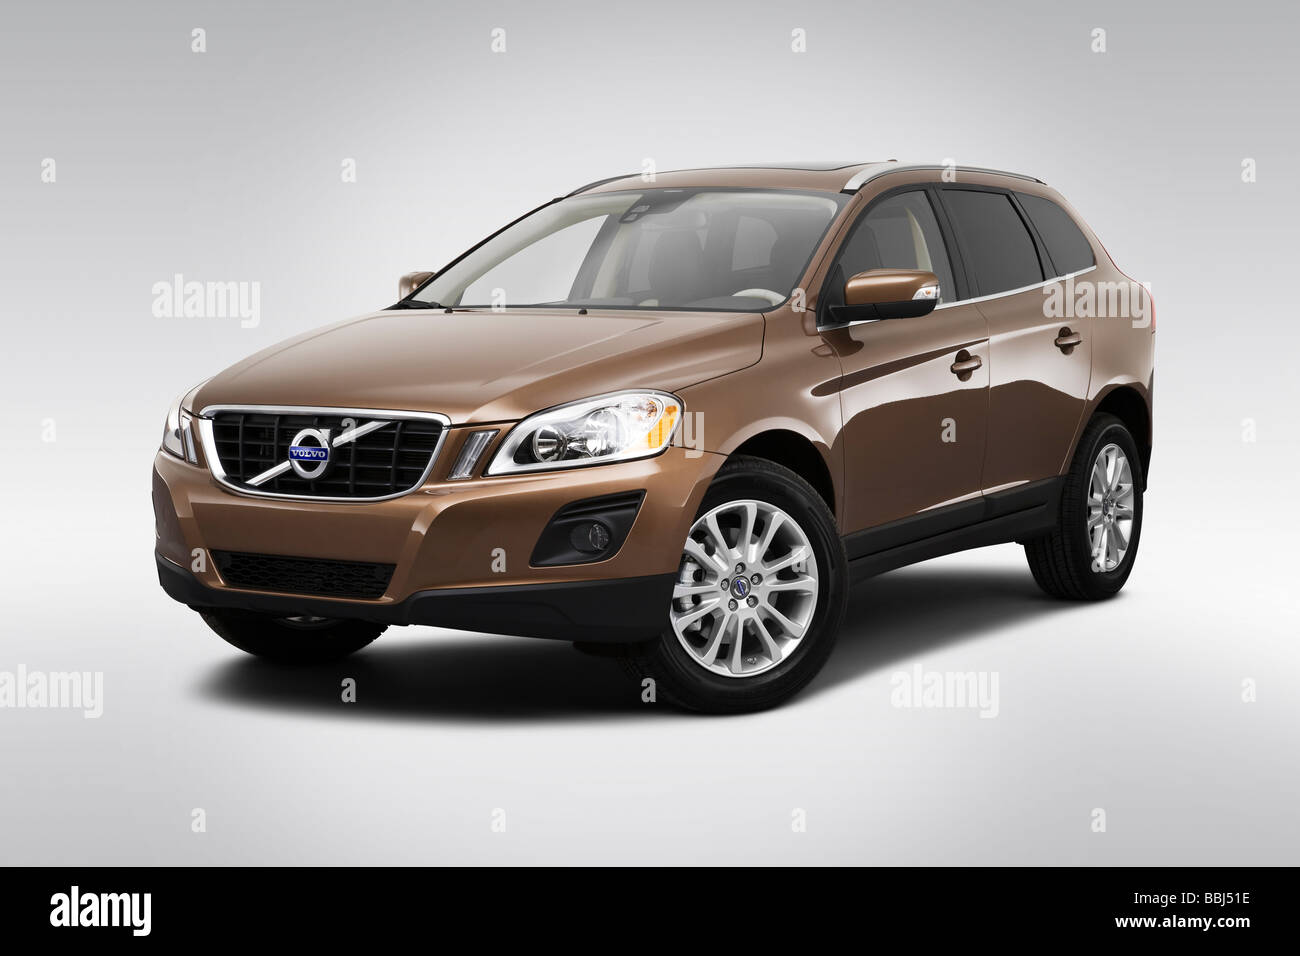 2010 Volvo XC60 T6 AWD in Beige - Front angle view Stock Photo